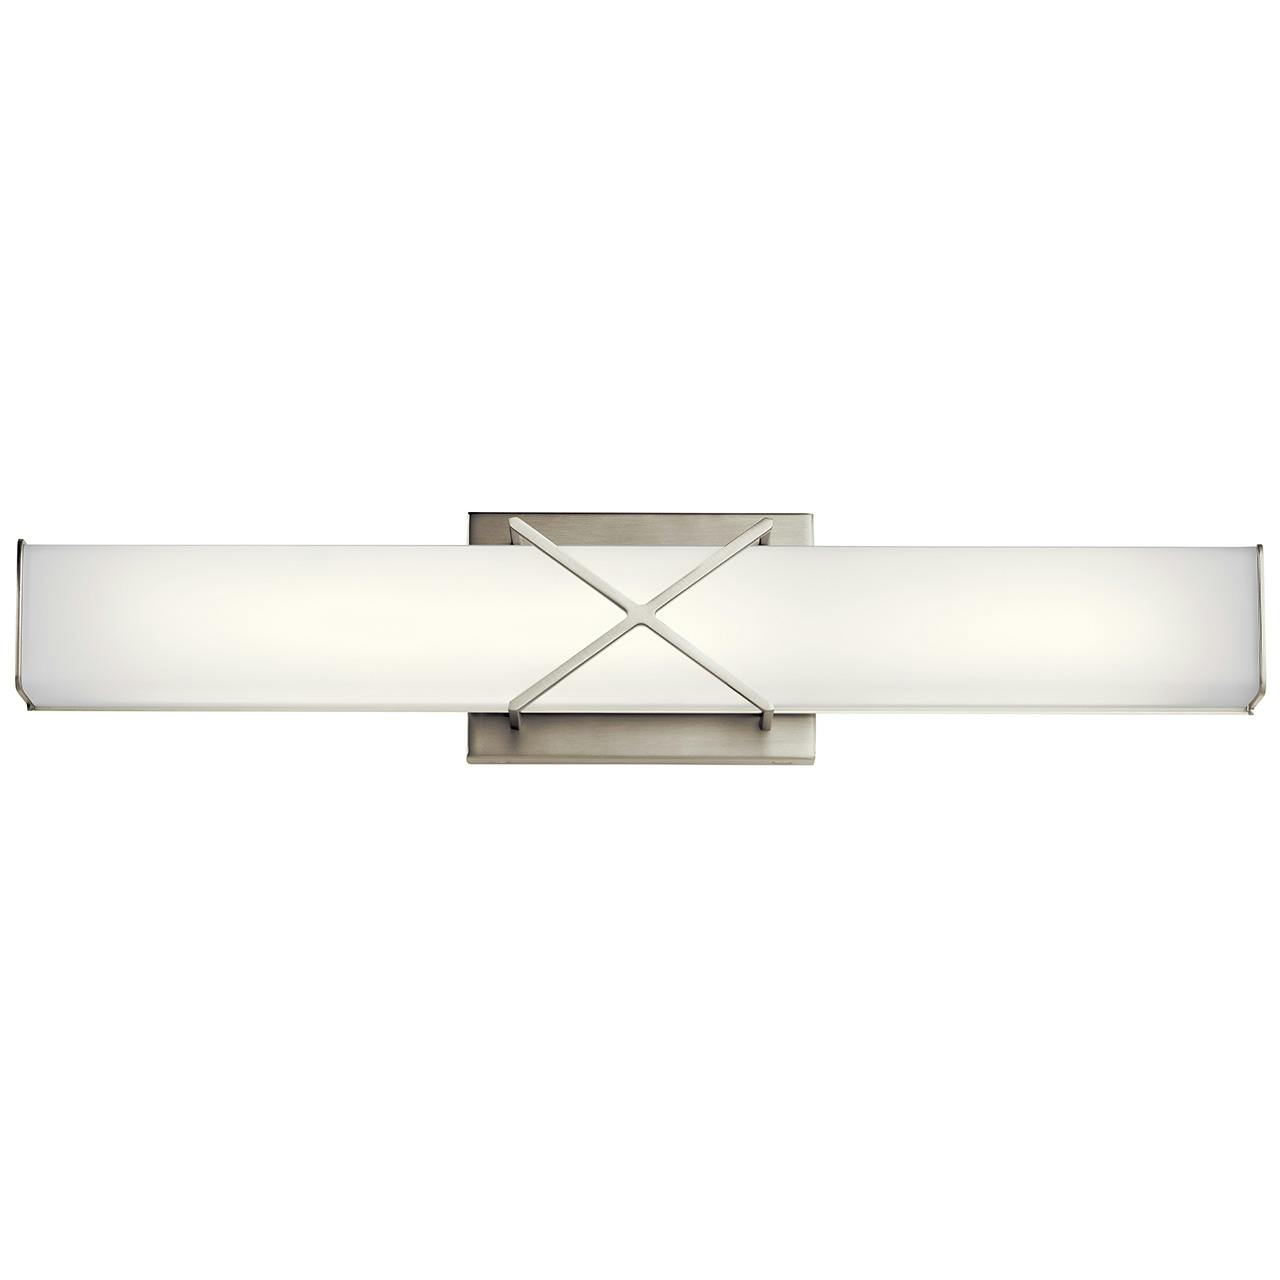 Product image of the 45657NILED shown hung horizontally